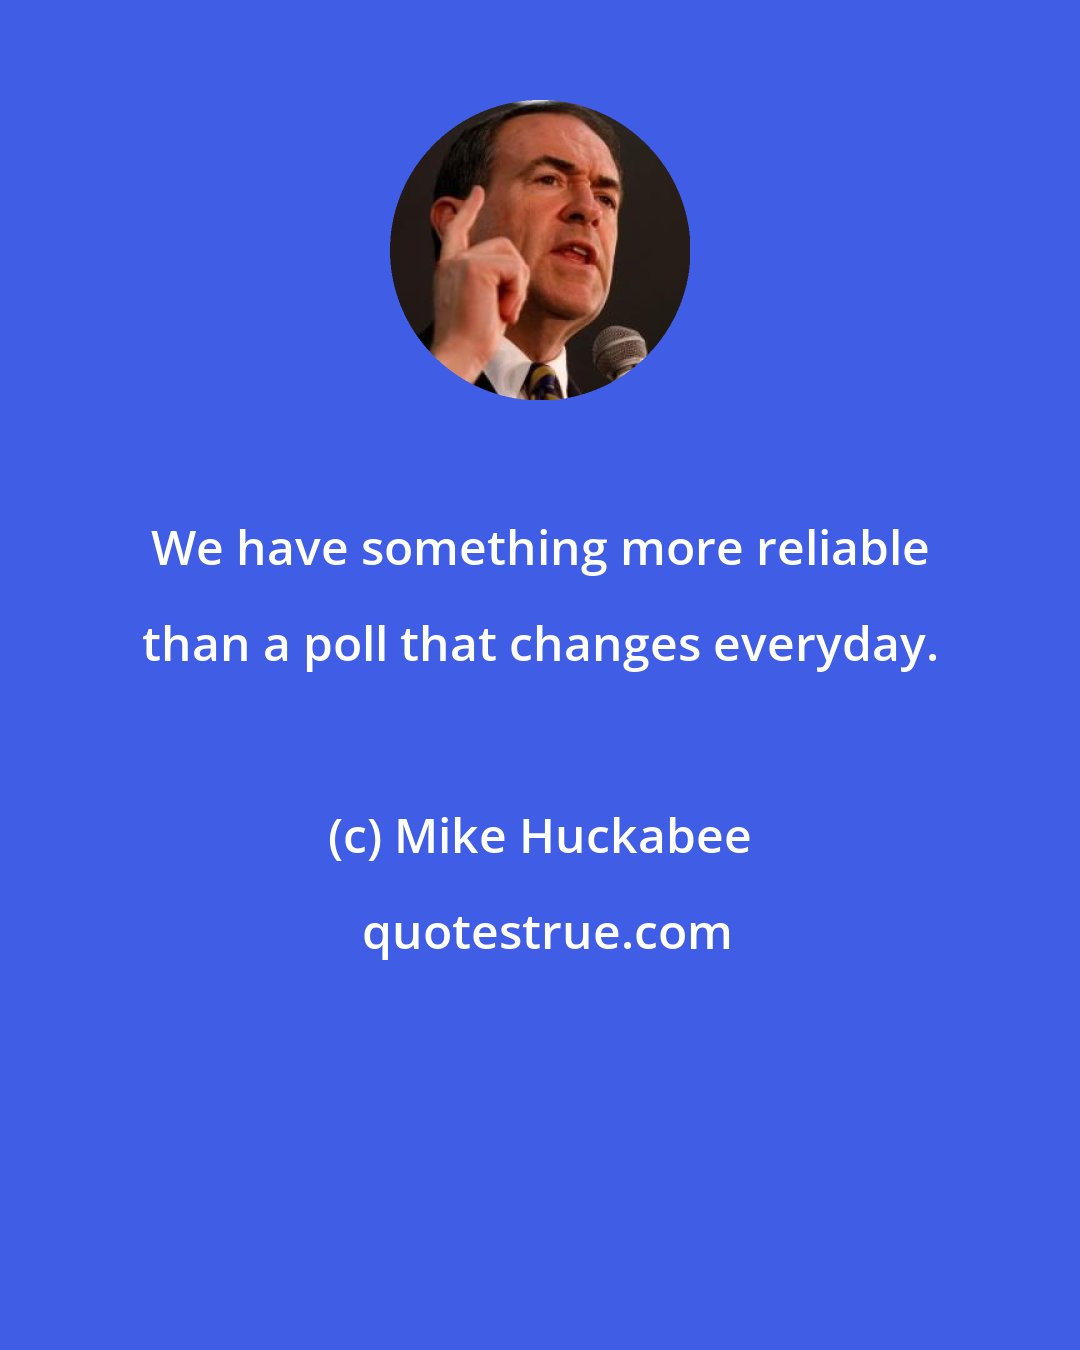 Mike Huckabee: We have something more reliable than a poll that changes everyday.